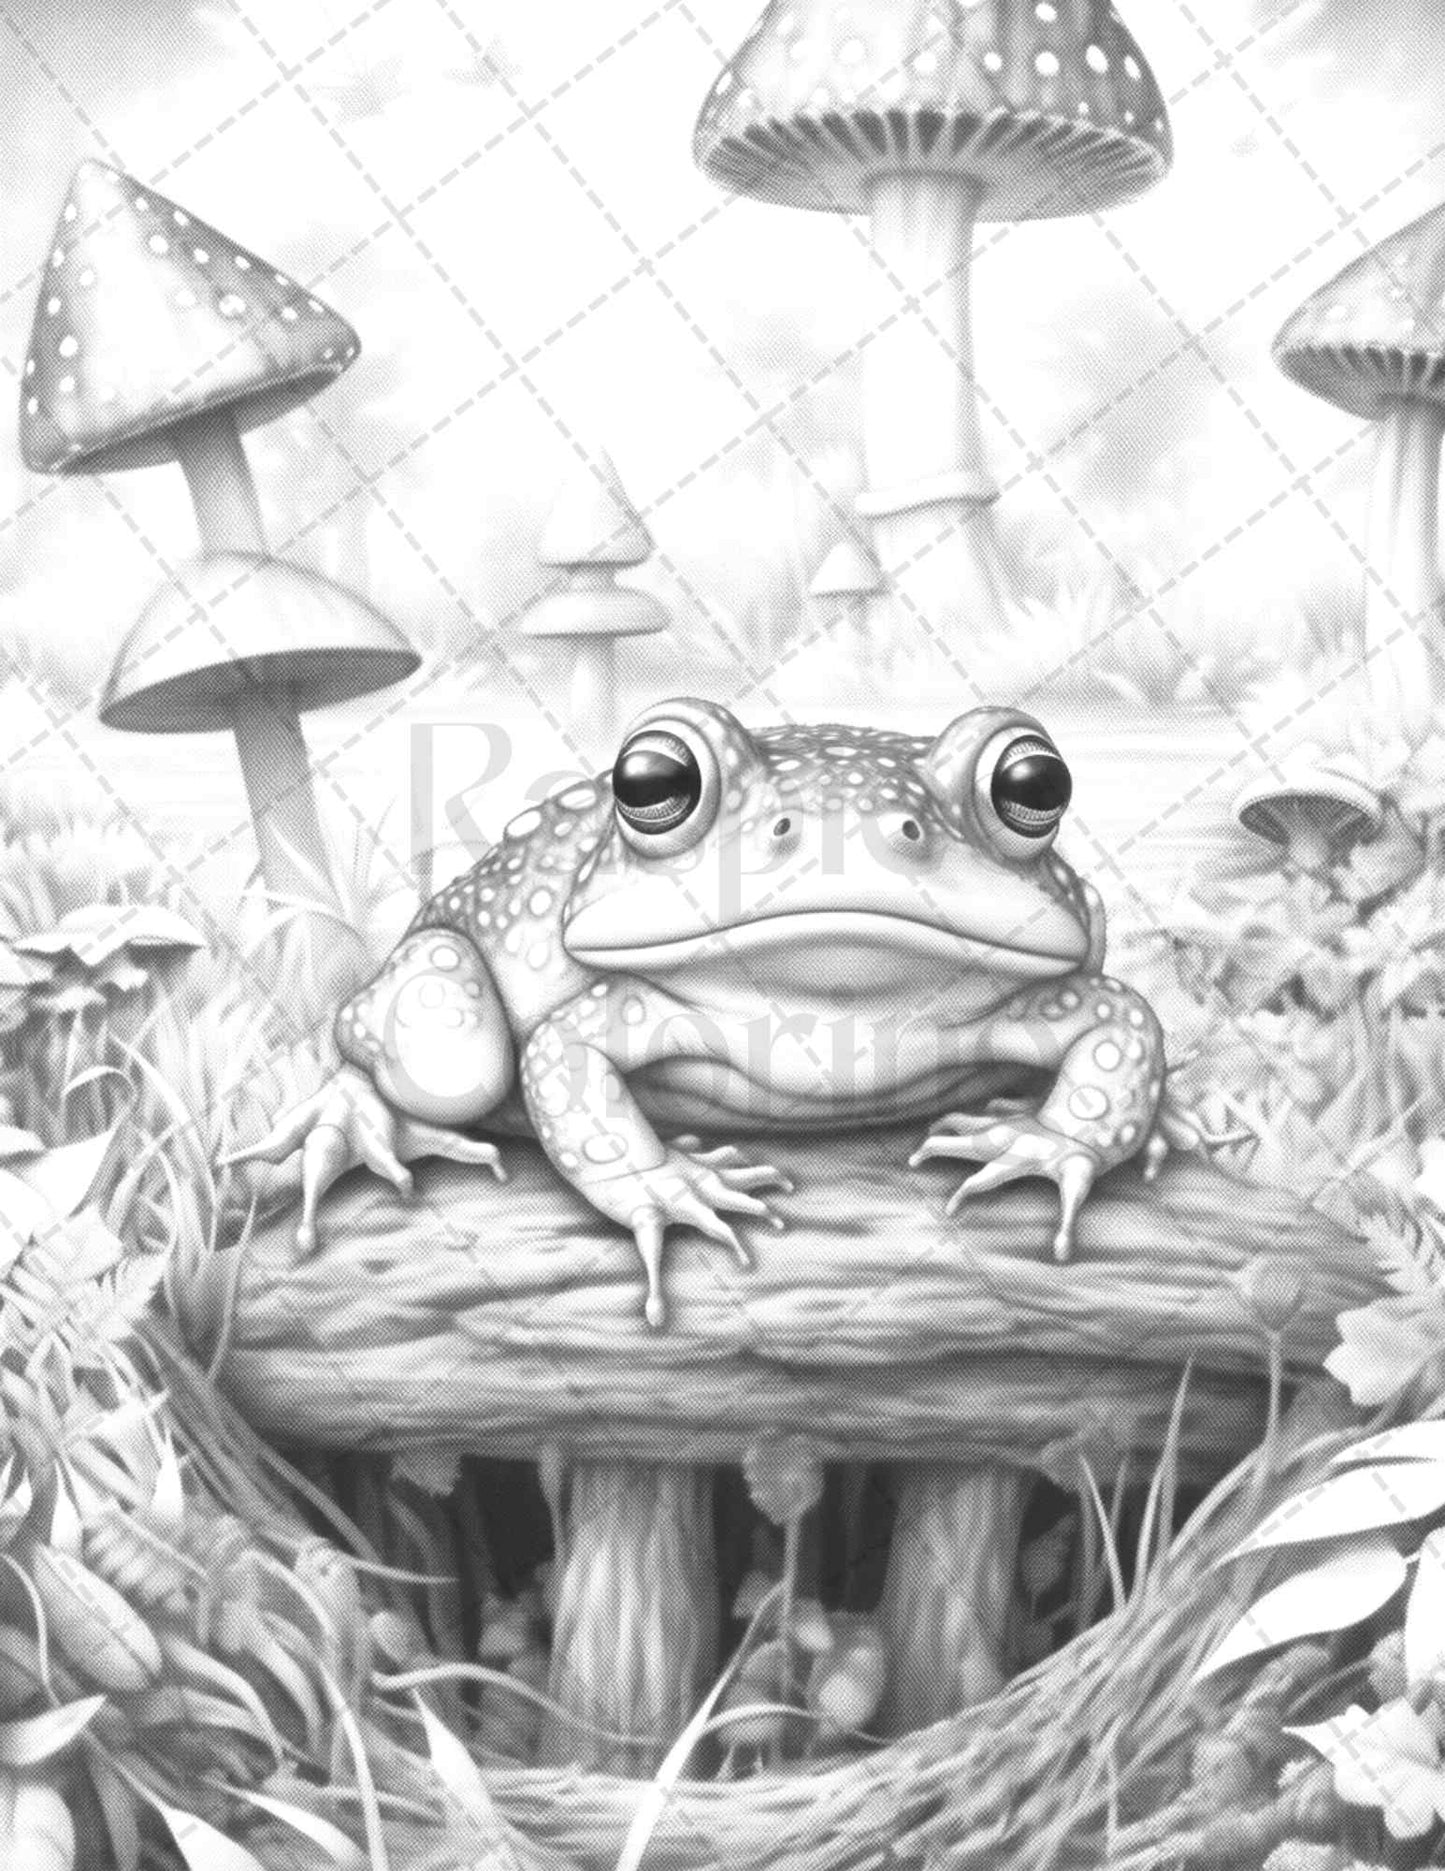 42 Cottagecore Frog Grayscale Coloring Pages Printable for Adults, PDF File Instant Download - raspiee